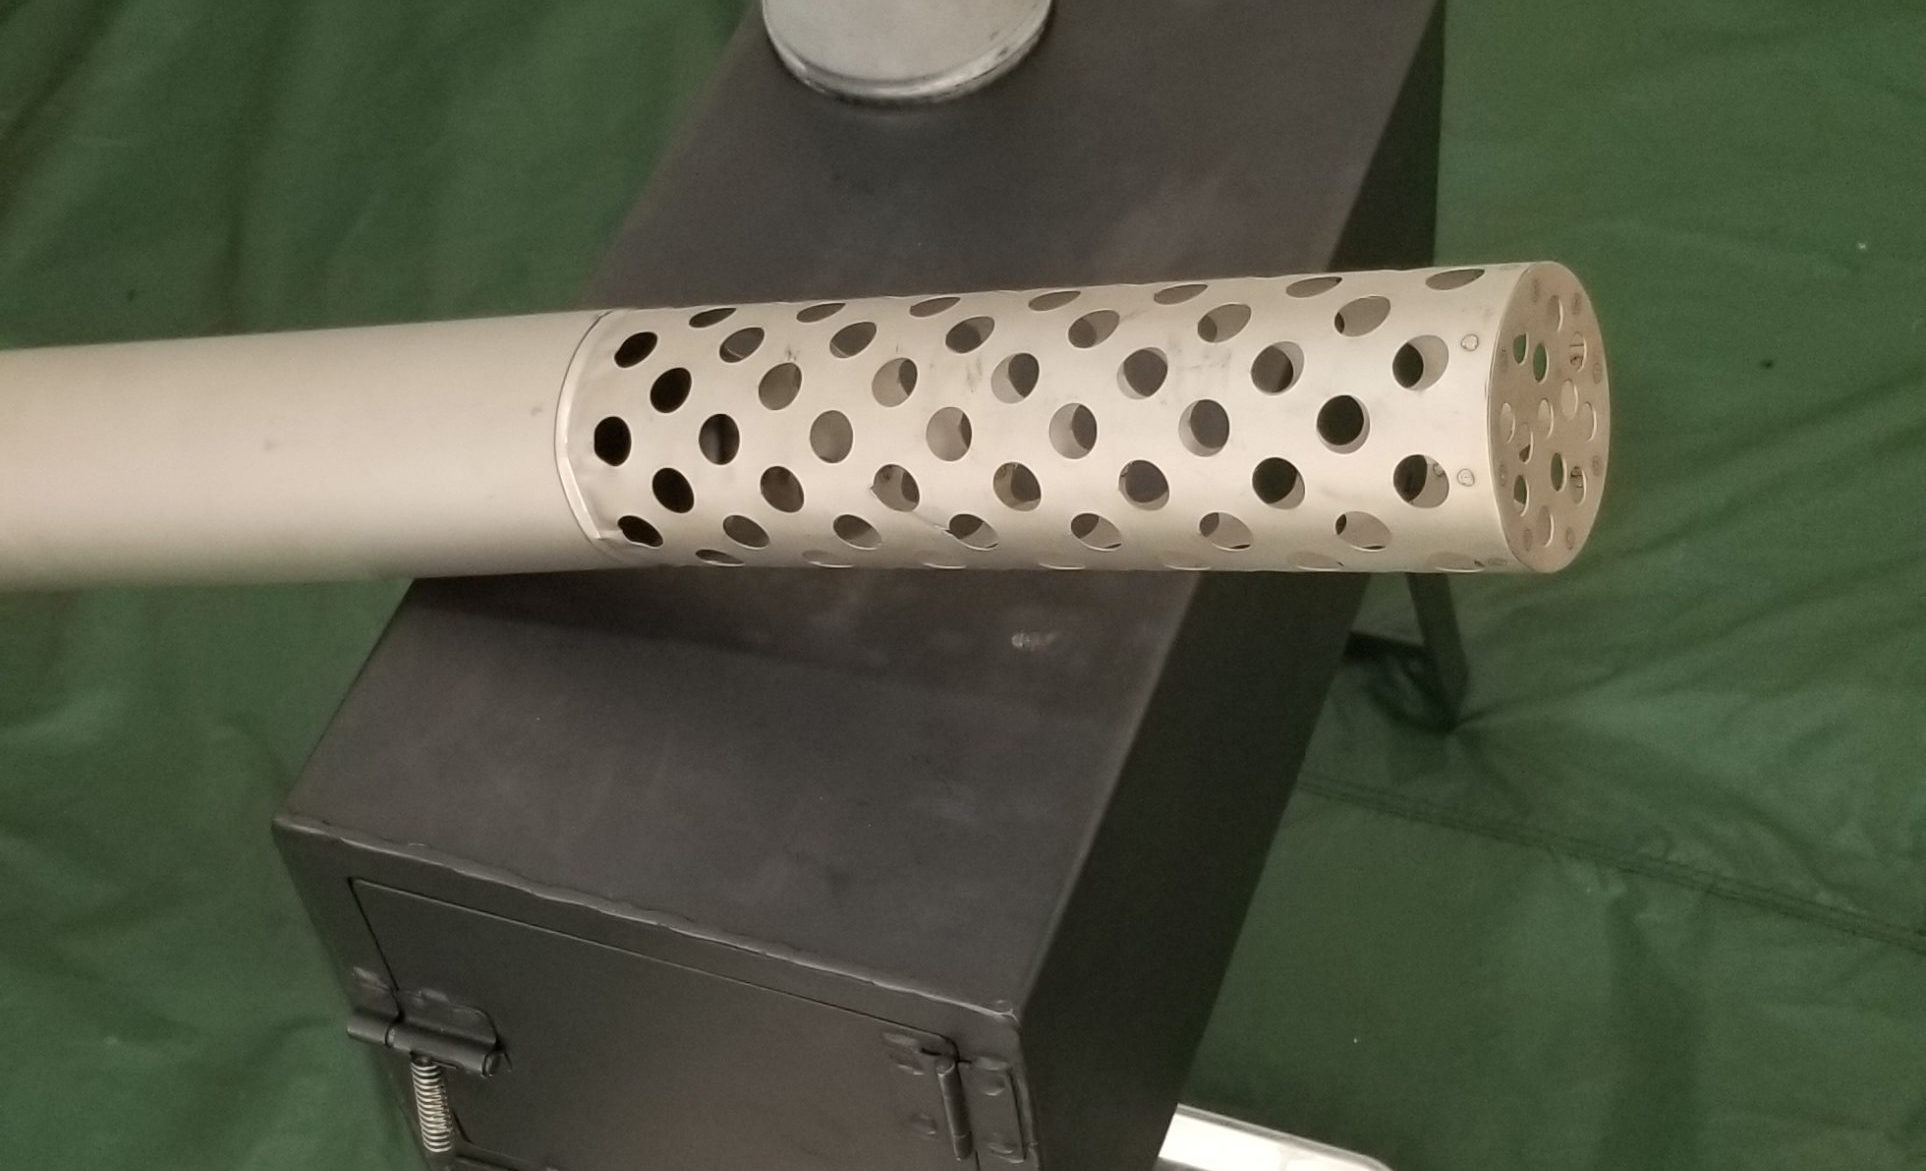 a spark arrestor on a stove pipe